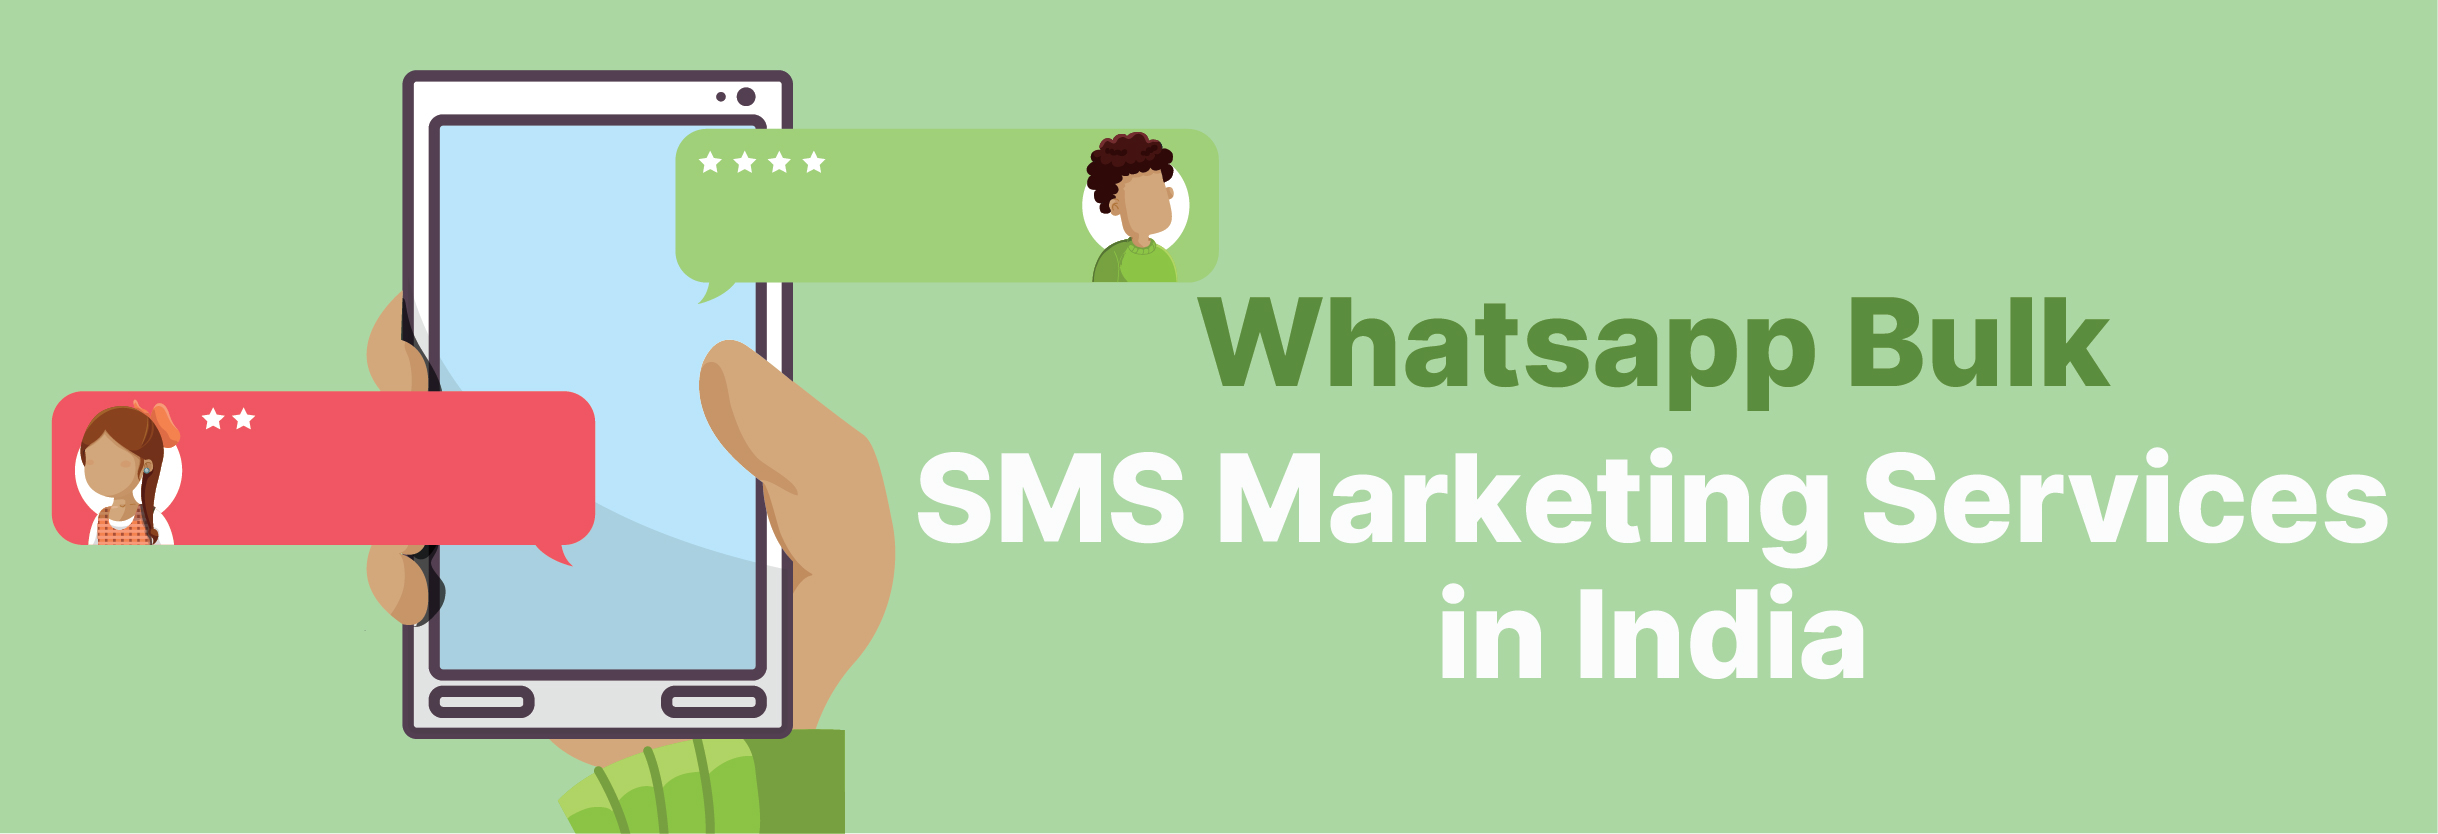 Whatsapp Bulk SMS Marketing Services in India